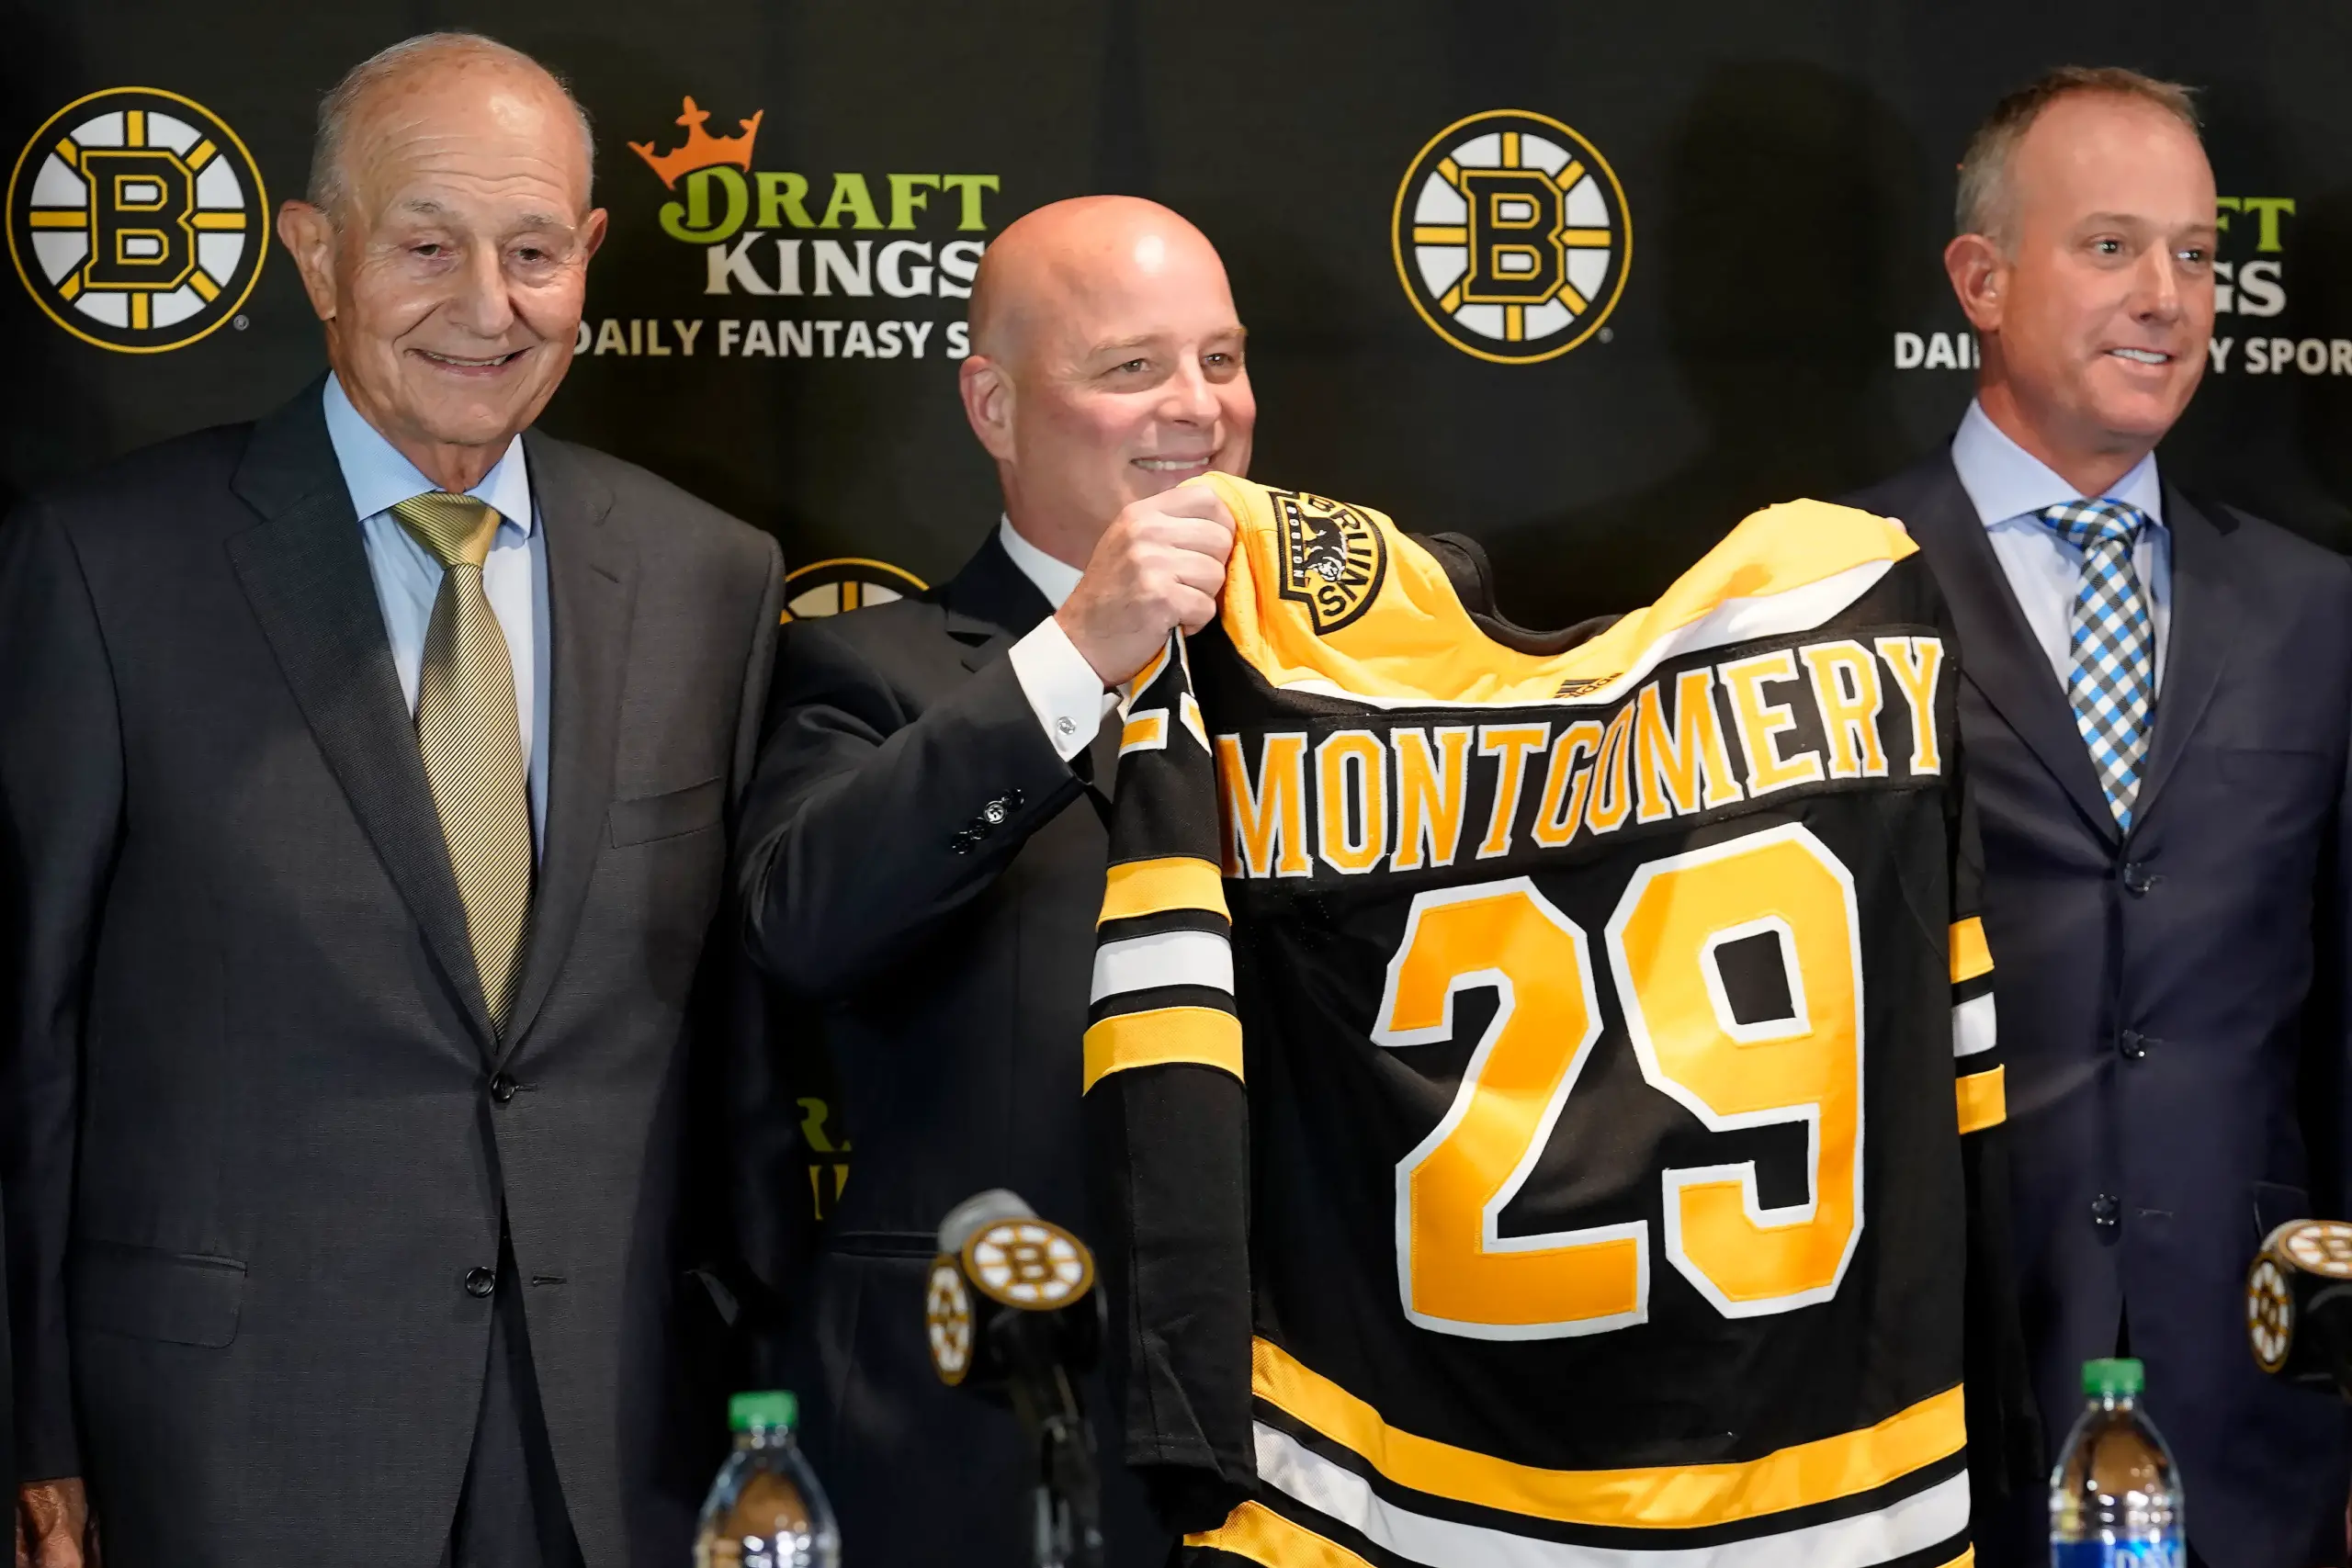 Who Owns the Boston Bruins